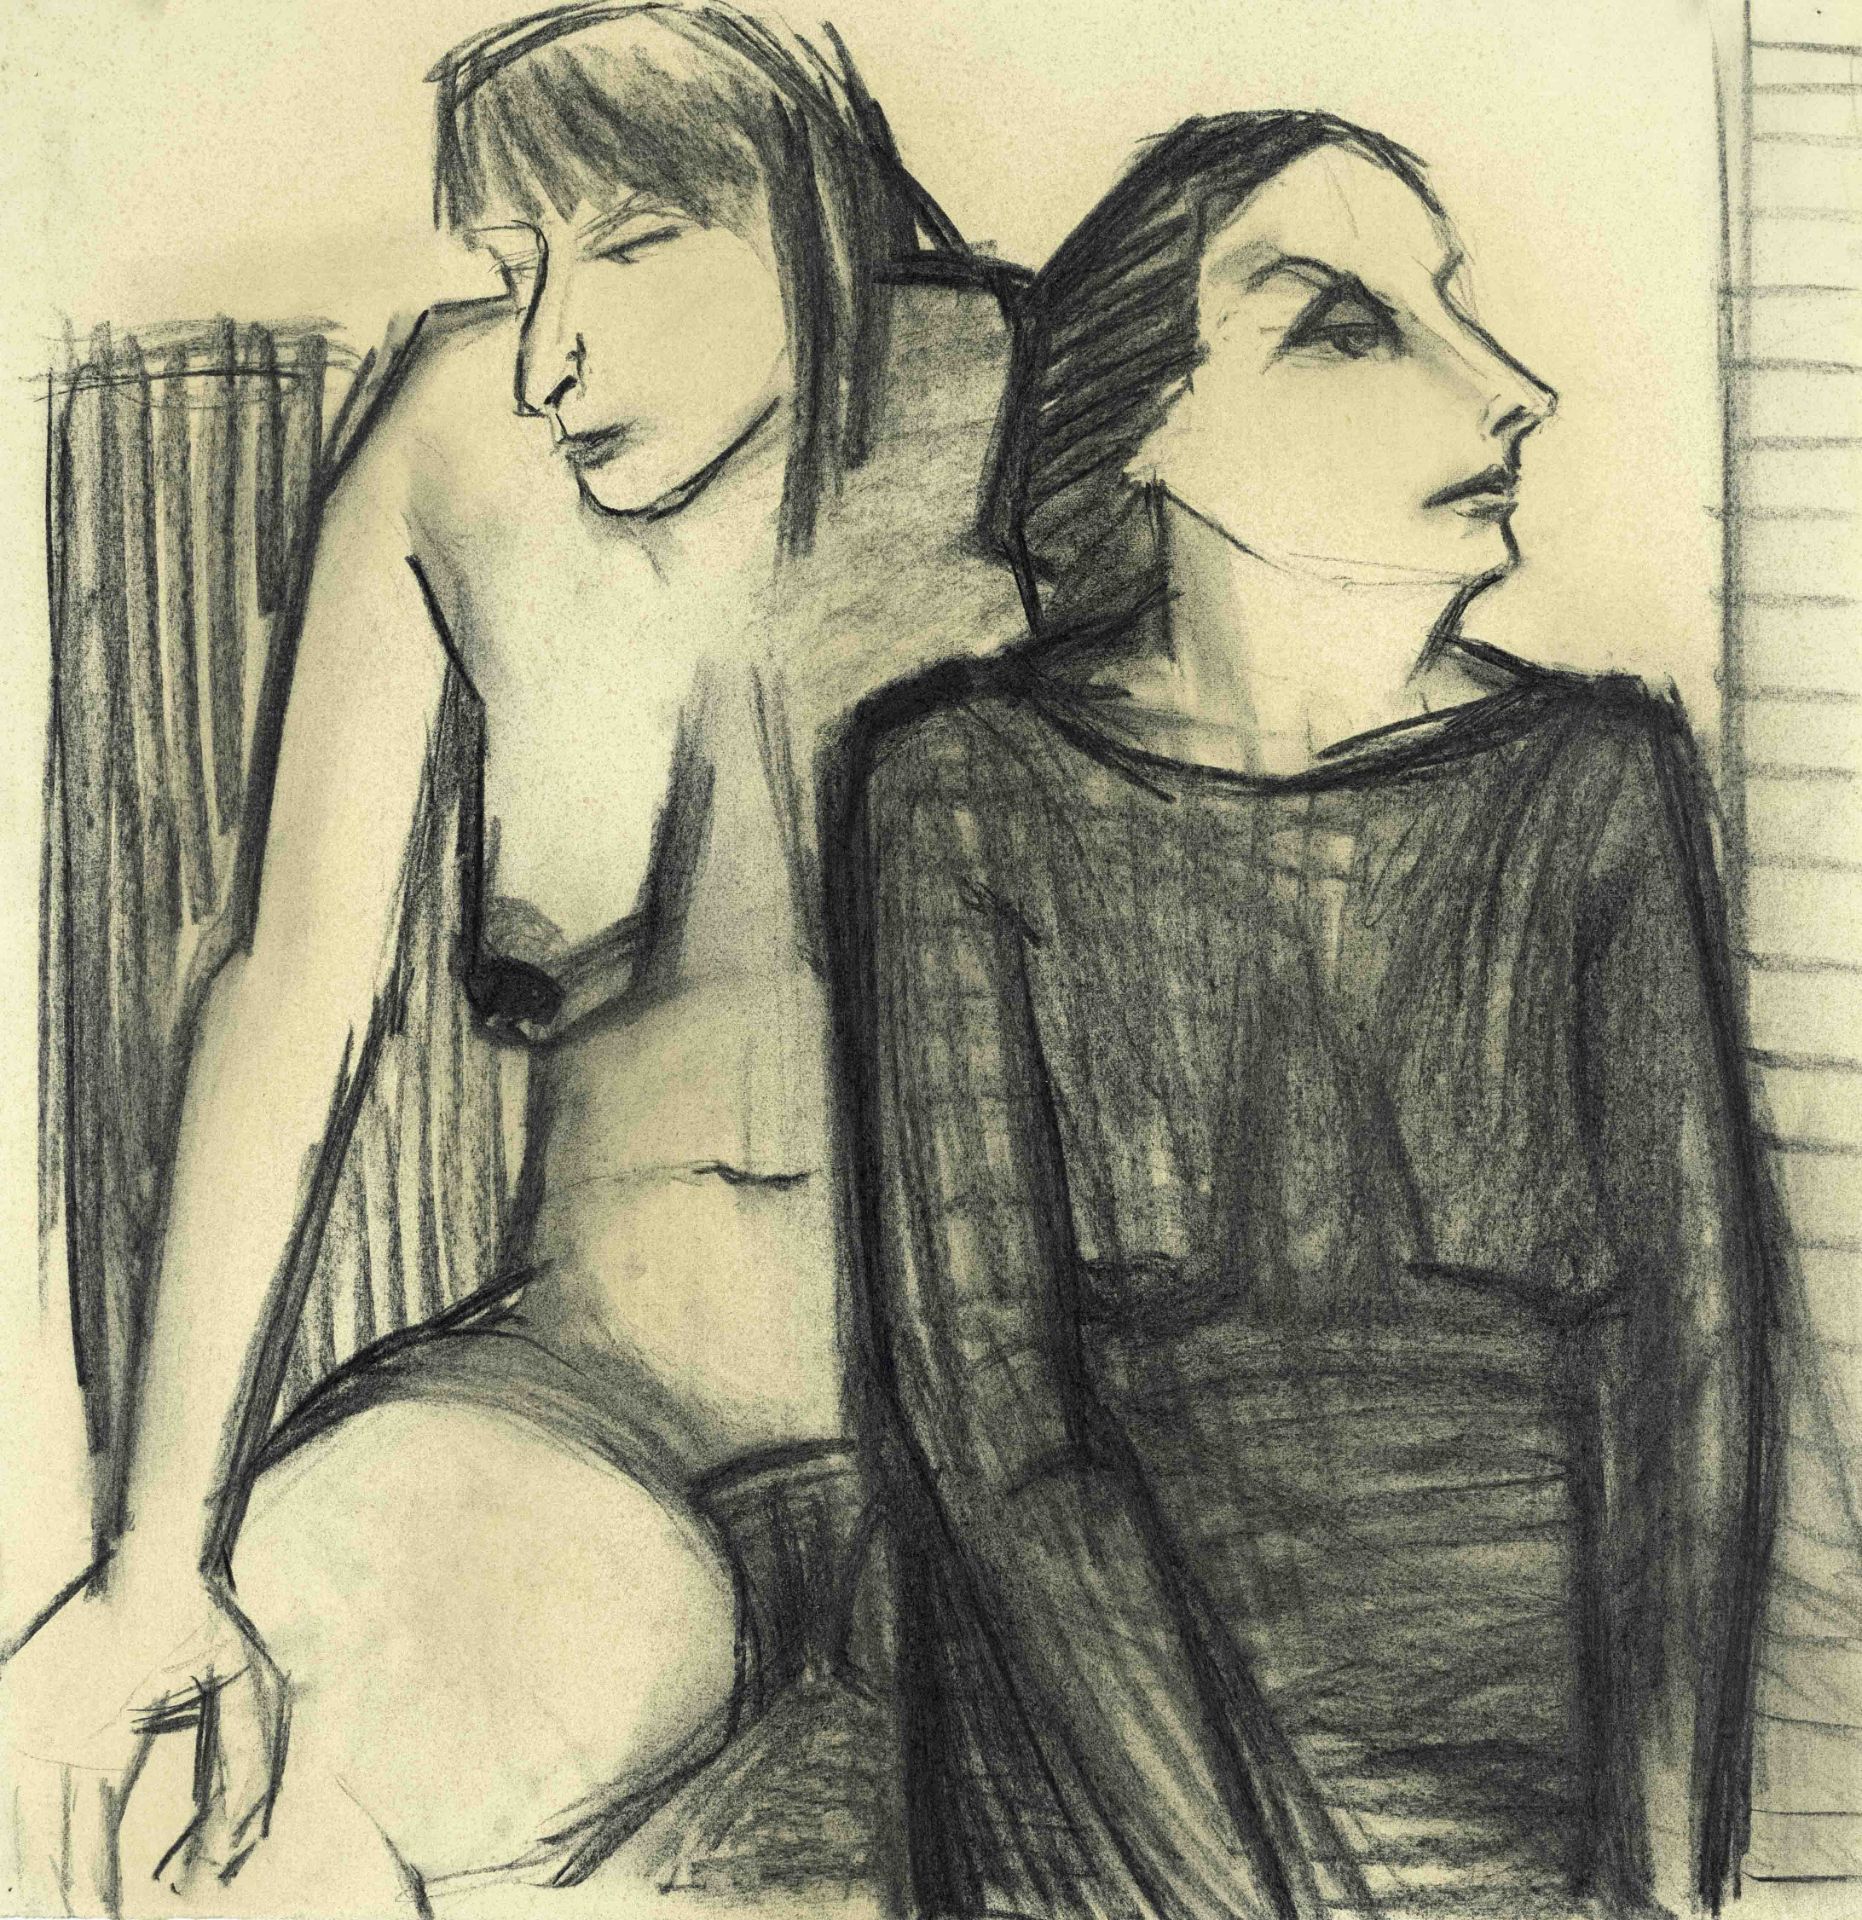 Marion Kallauka (*1949), 11 charcoal drawings by the Darmstadt-born artist, who studied in Berlin